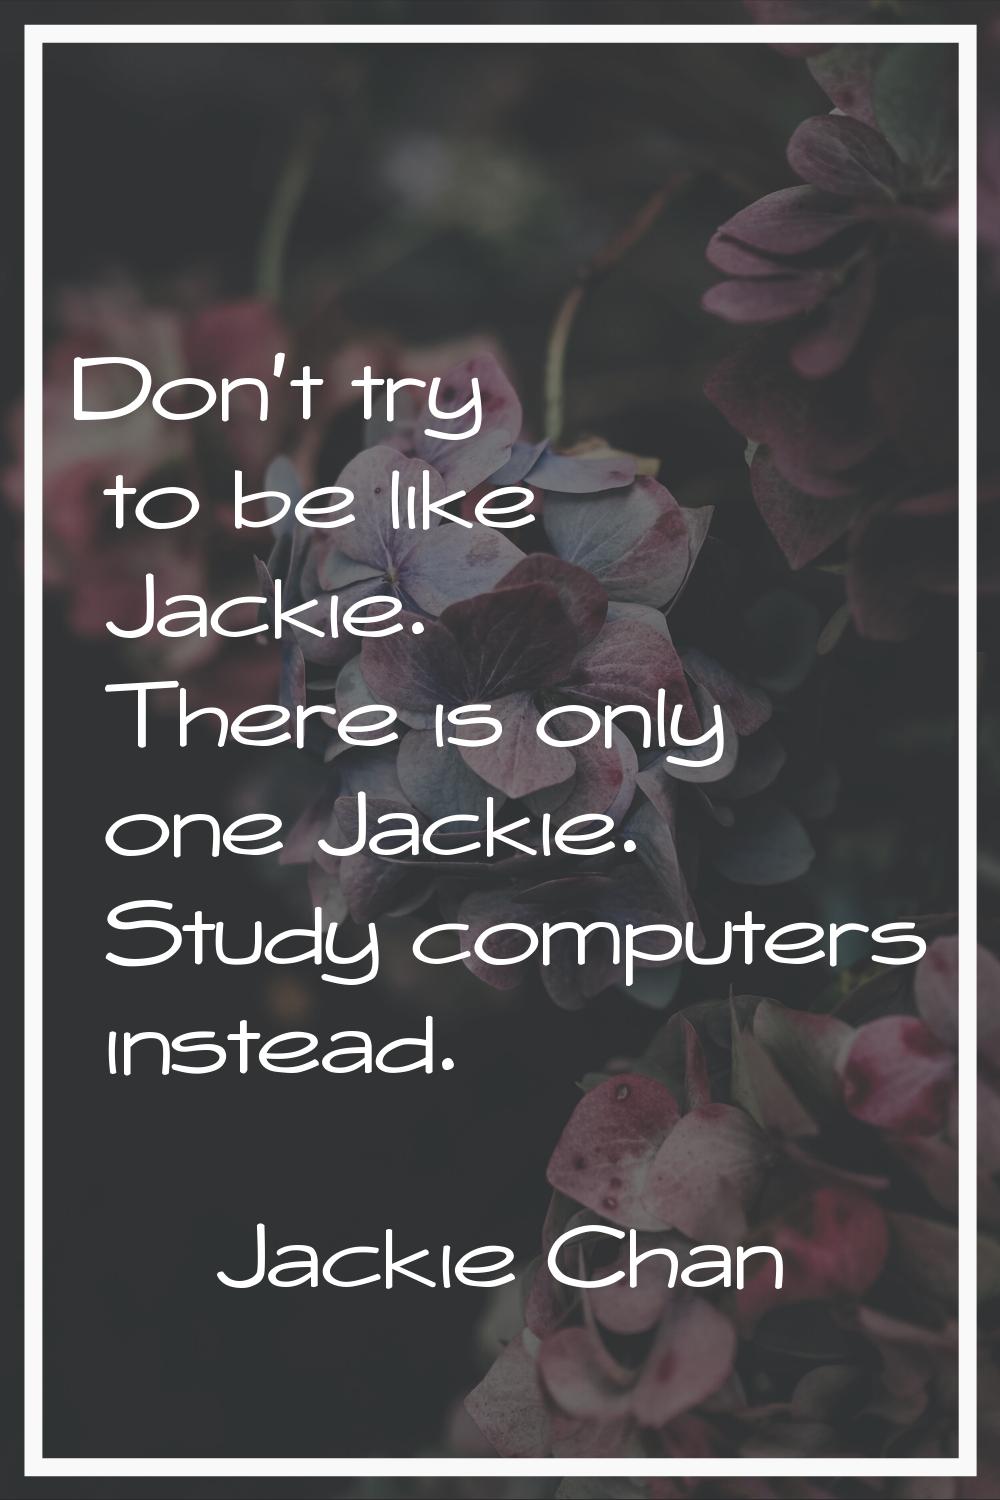 Don't try to be like Jackie. There is only one Jackie. Study computers instead.